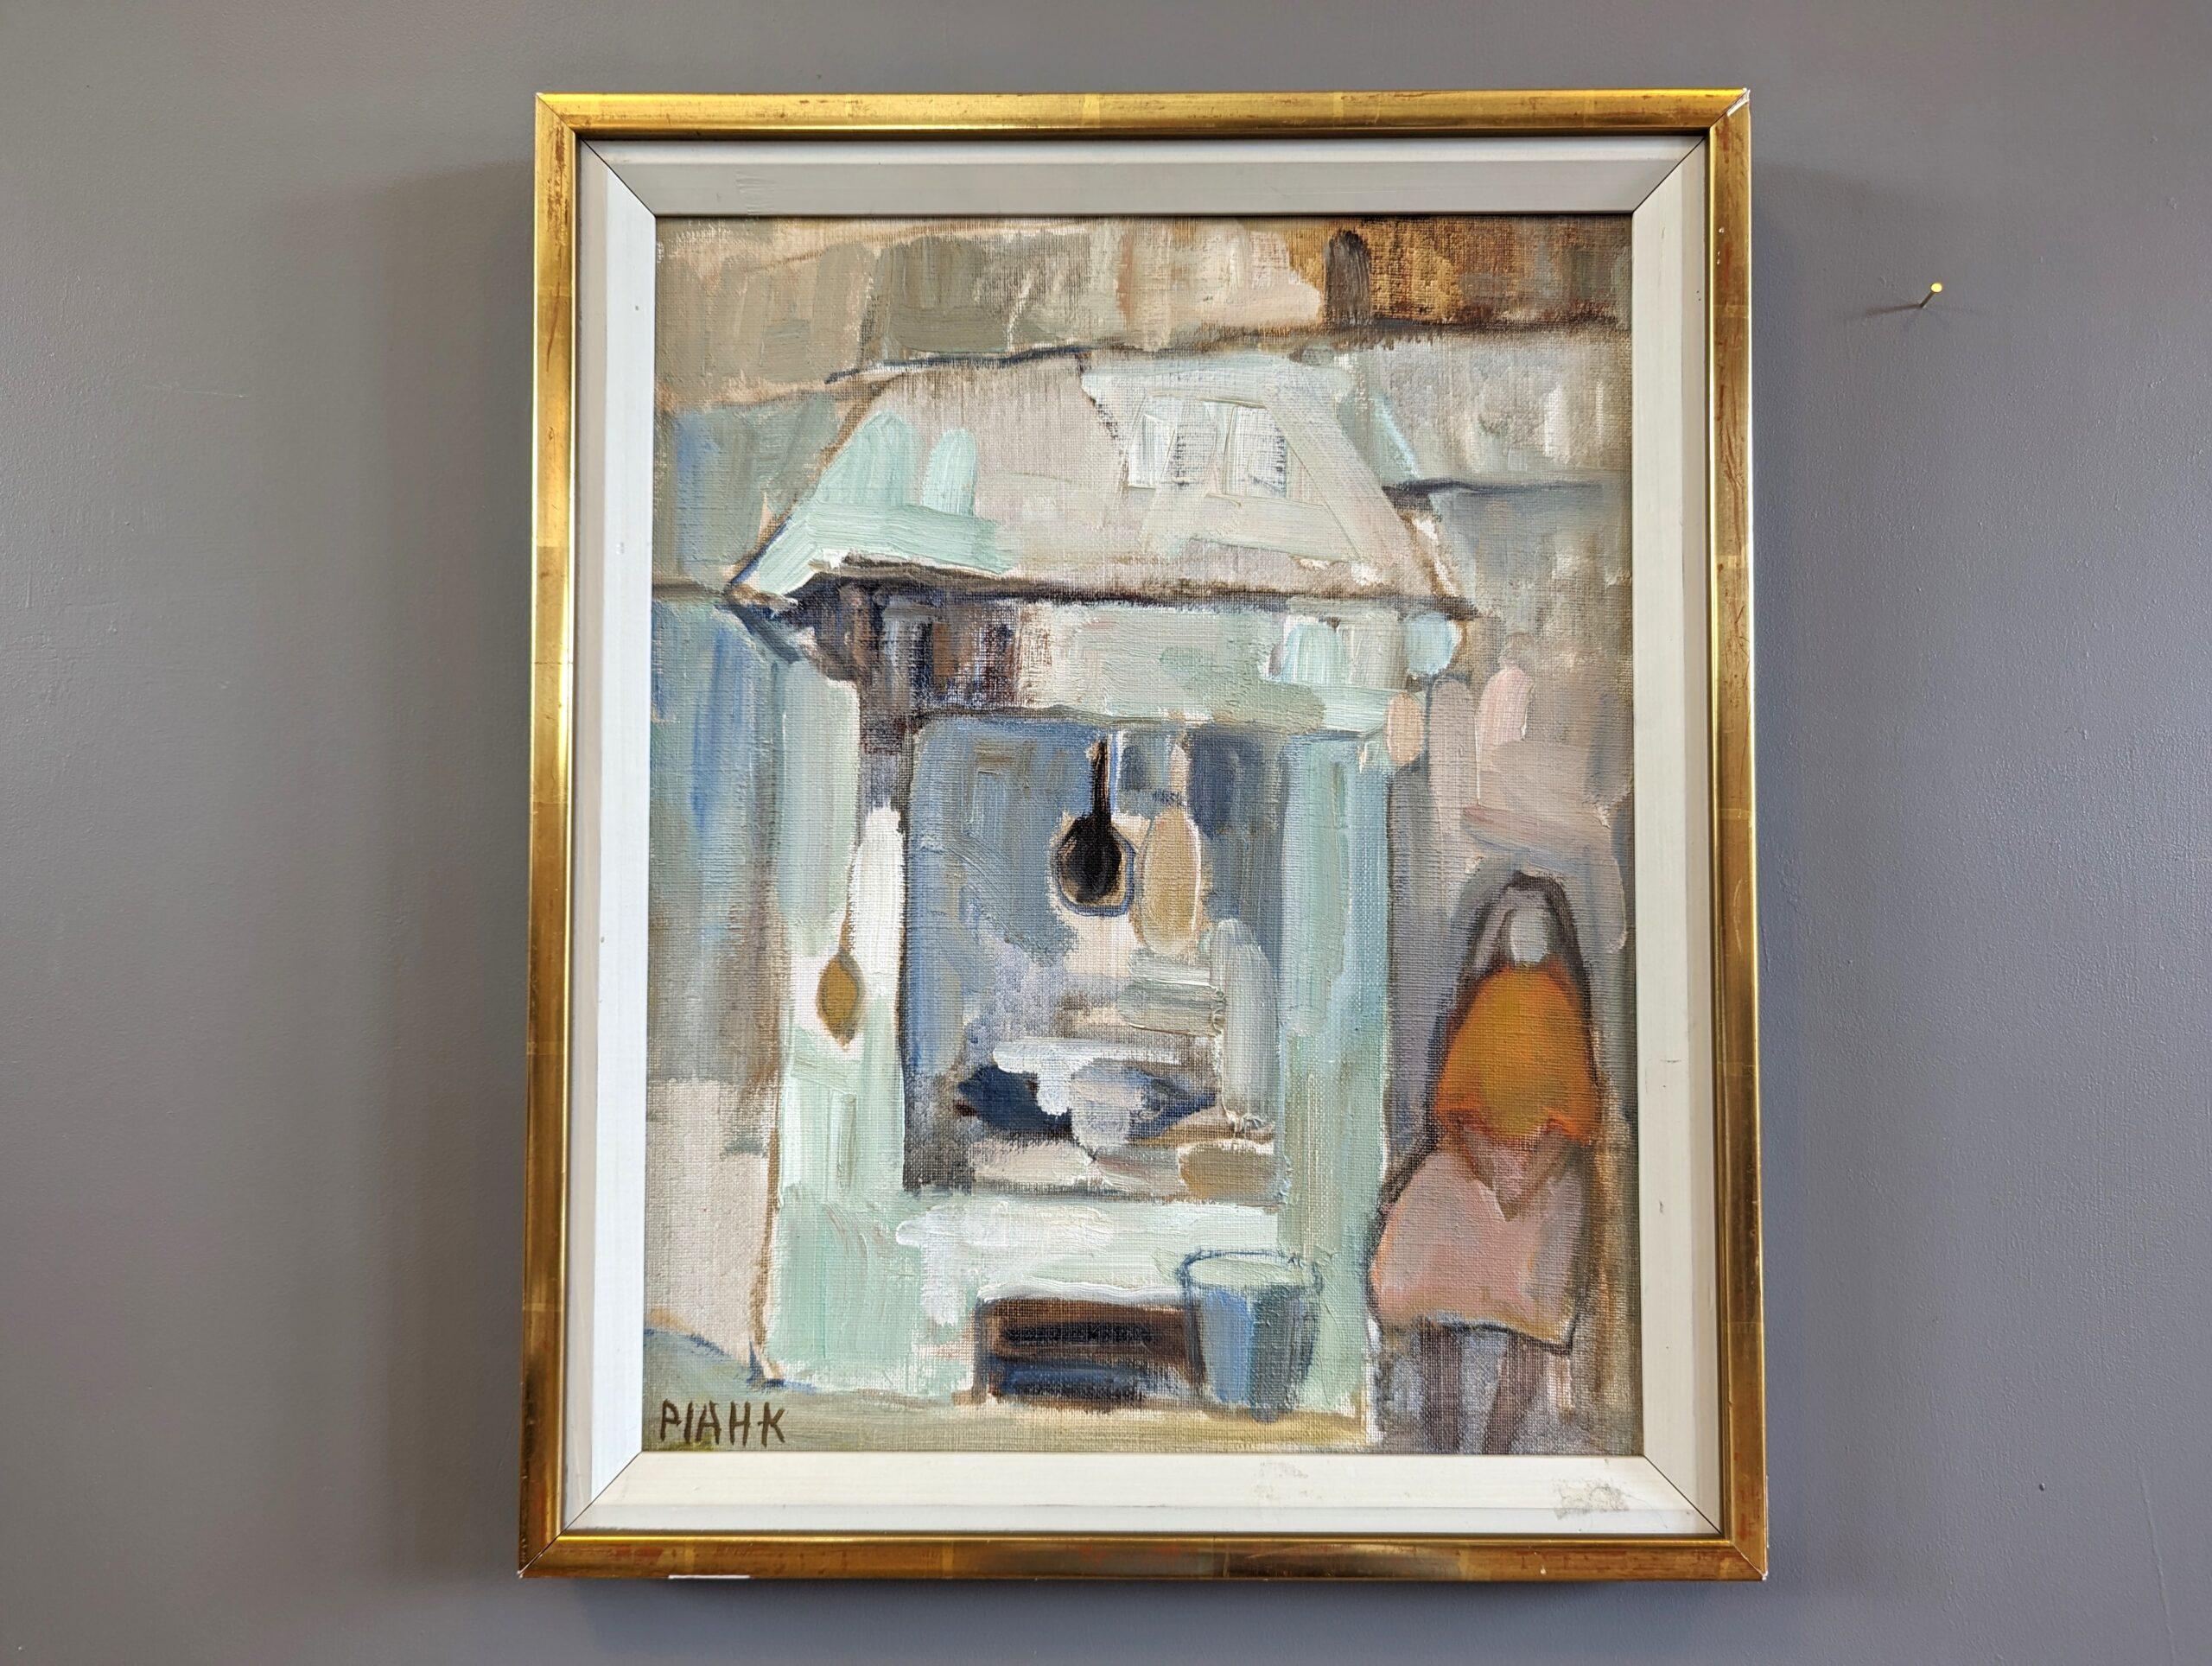 A RESTFUL MOMENT 
Size: 47 x 39 cm (including frame)
Oil on Canvas

It is mid-afternoon, the house is quiet, and the kitchen is in repose. The cook takes a moment to rest her tired legs and aching back. She knows it won’t be long before the